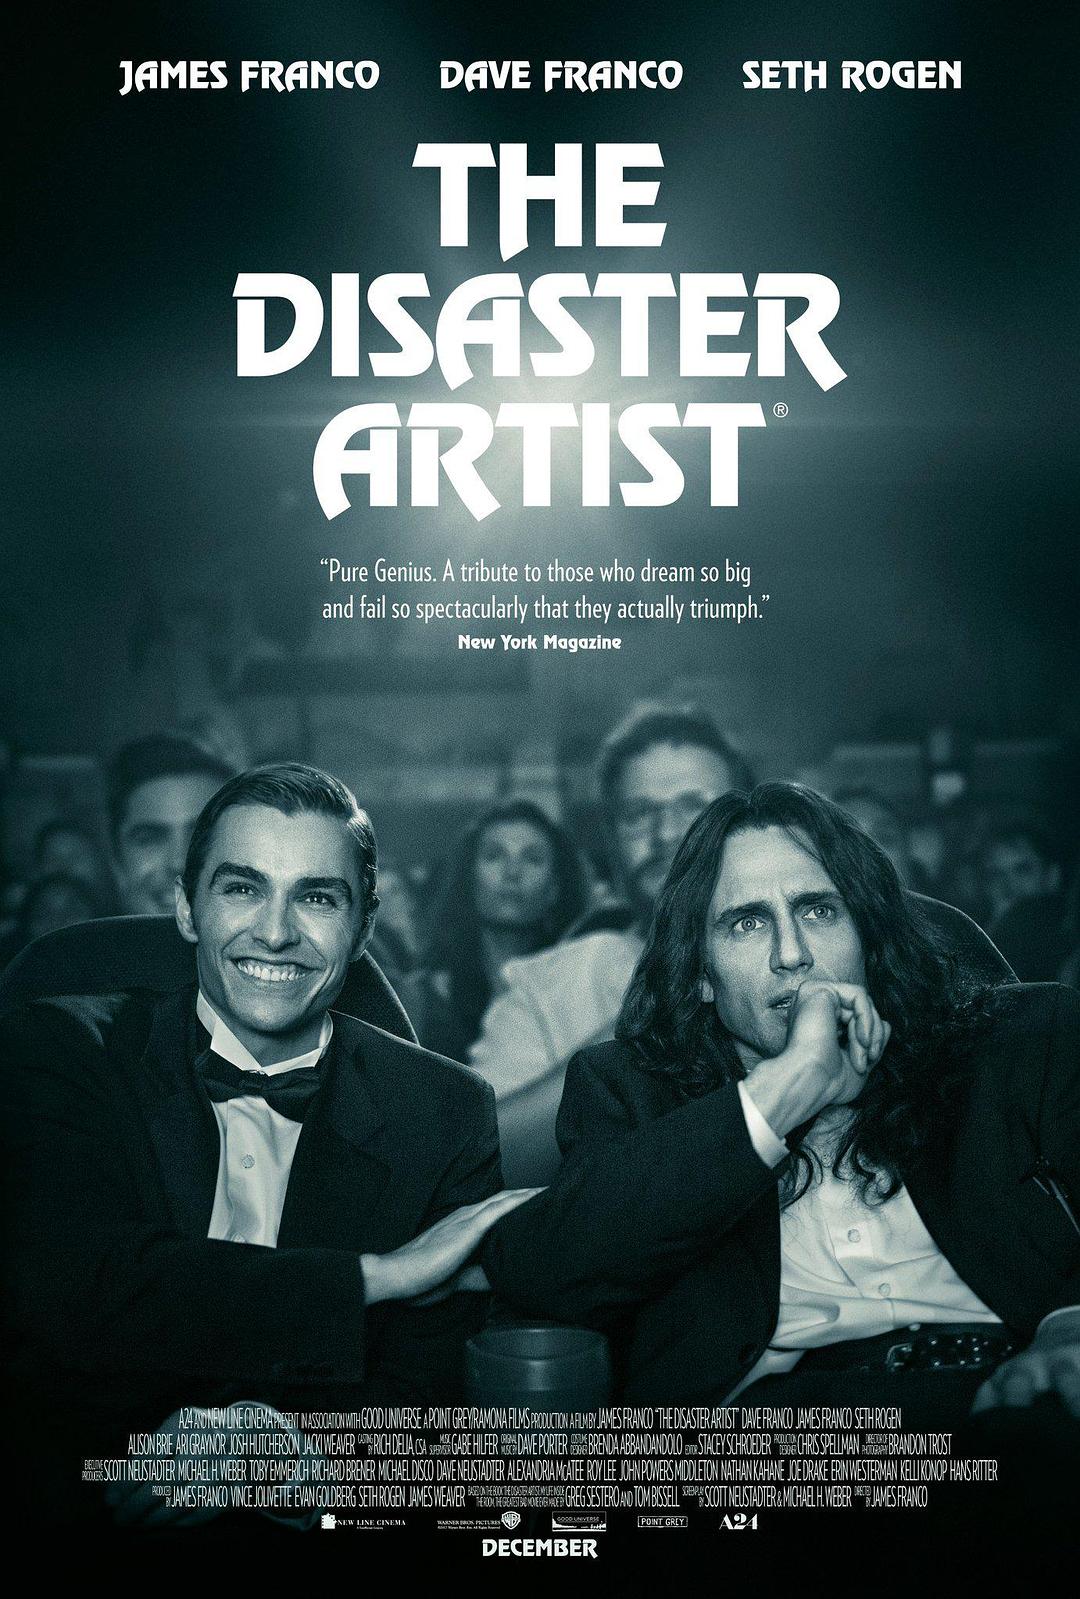  The.Disaster.Artist.2017.1080p.BluRay.x264.TrueHD.7.1-FGT 10.36GB-1.png